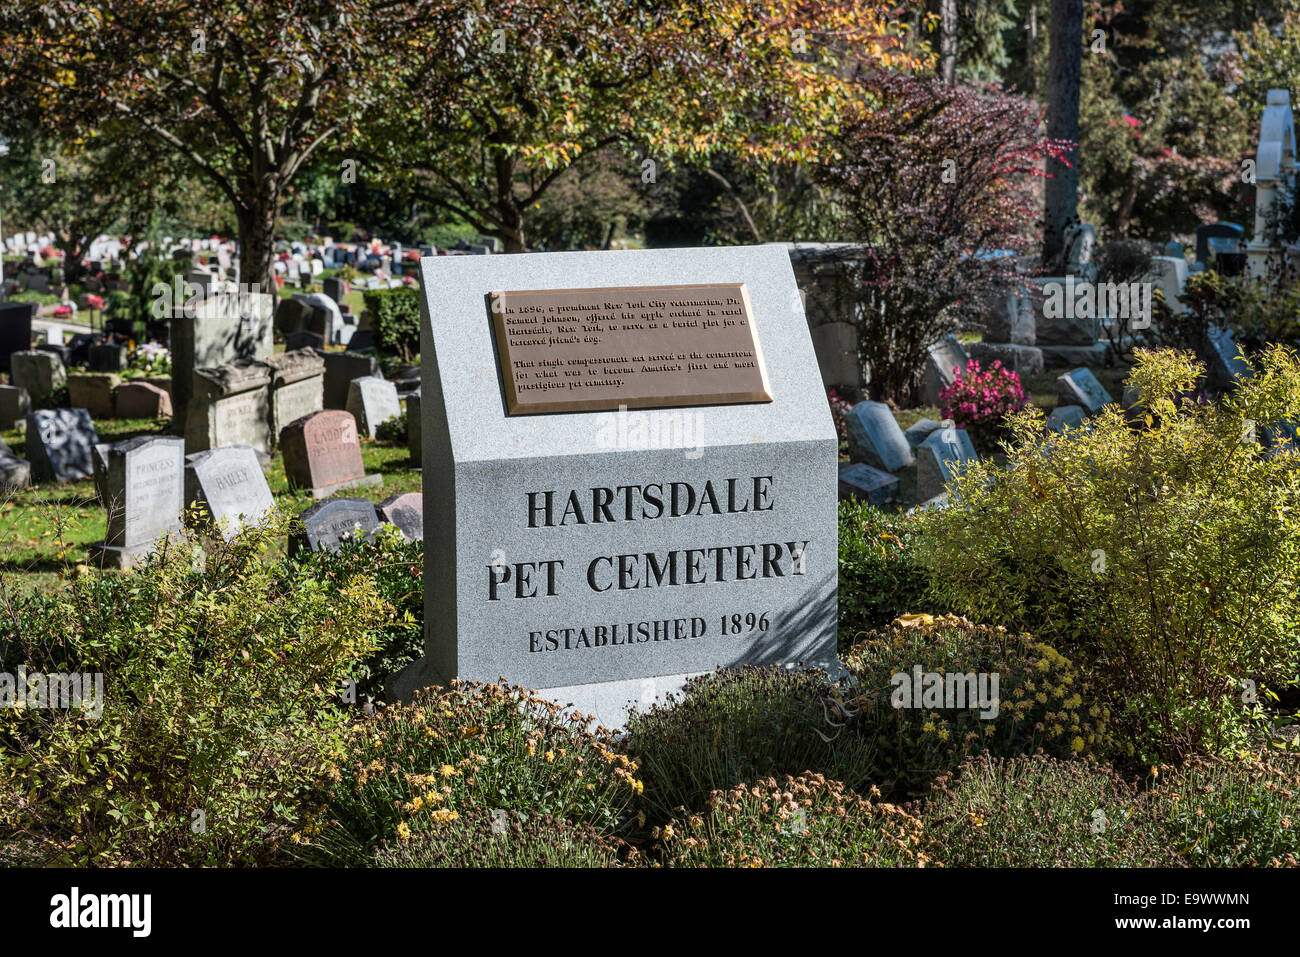 Hartsdale Pet Cemetery, Oldest operating pet cemetery in the world, Hartsdale, New York, USA Stock Photo